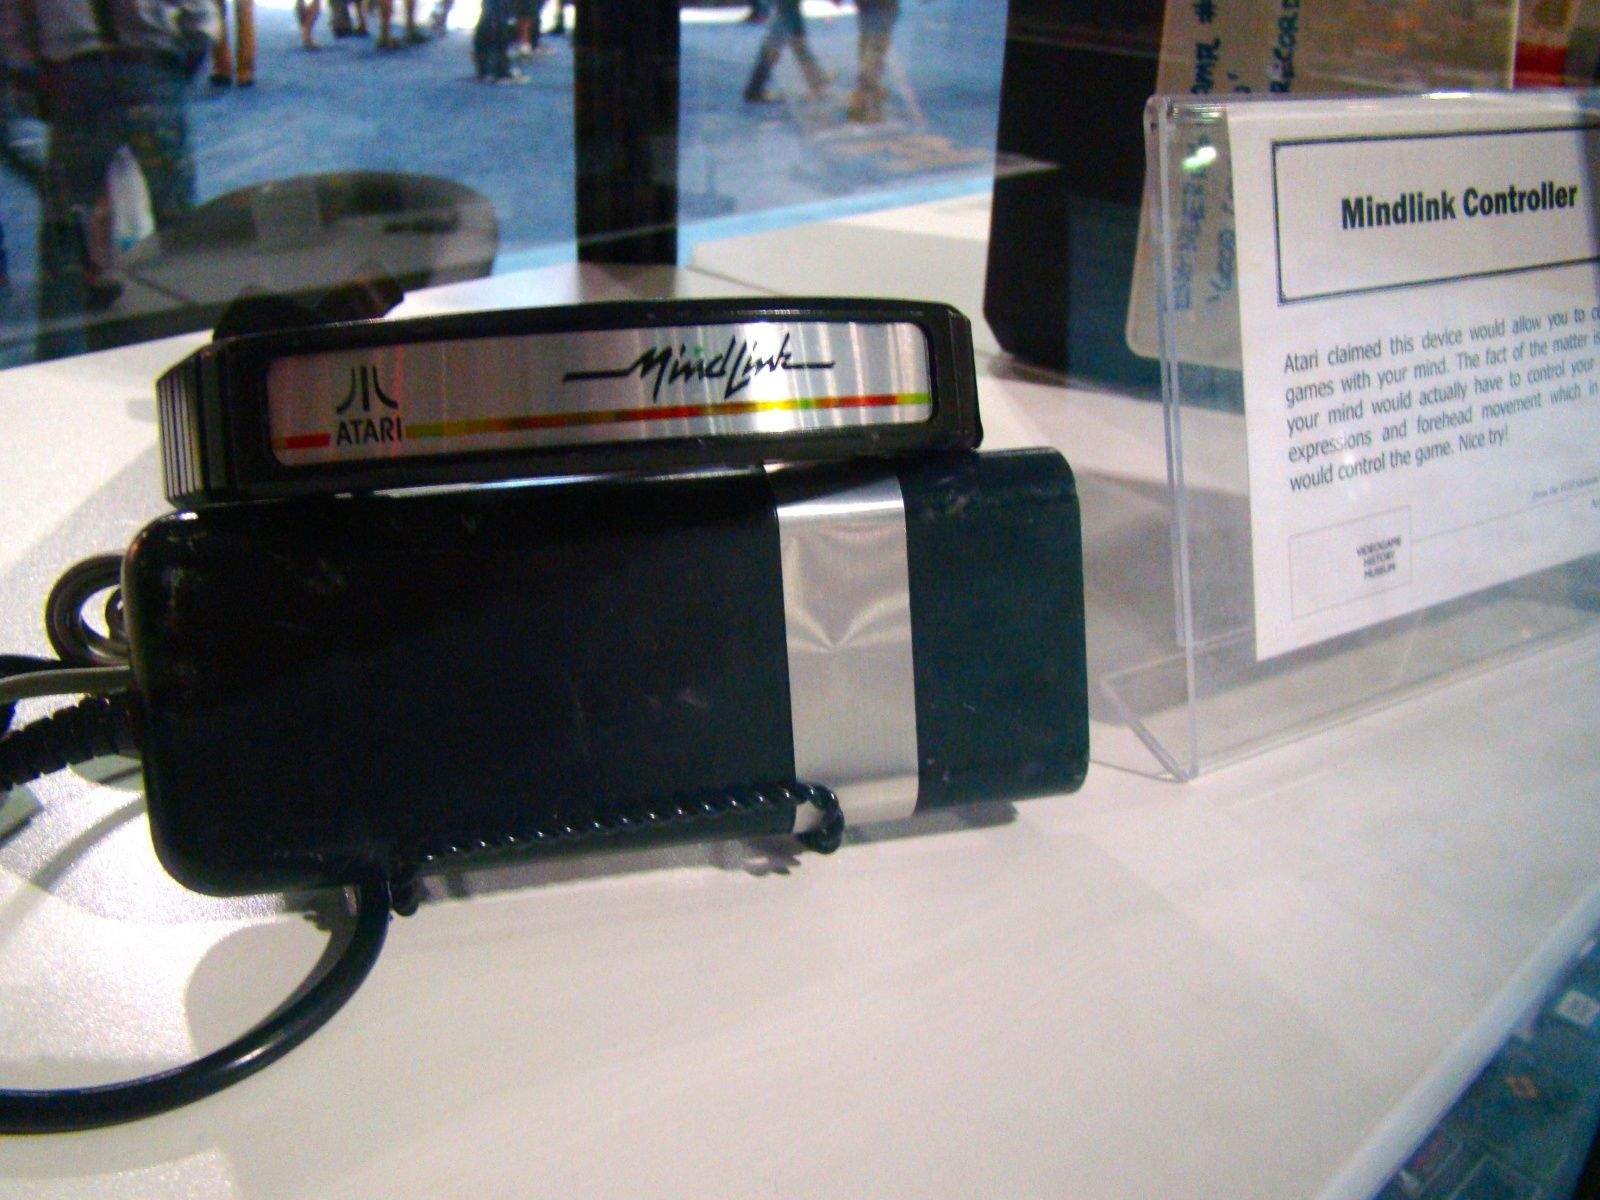 The Atari Mindlink was never released, though it was supposed to come out in 1984 for the Atari 2600. It was developed to read your head muscles (not actually your mind) and move stuff in the games developed for it, Bionic Breakthrough and Mind Maze. The games never even came out, either. Test players got headaches, apparently, moving their eyebrows around to play these uninteresting games.